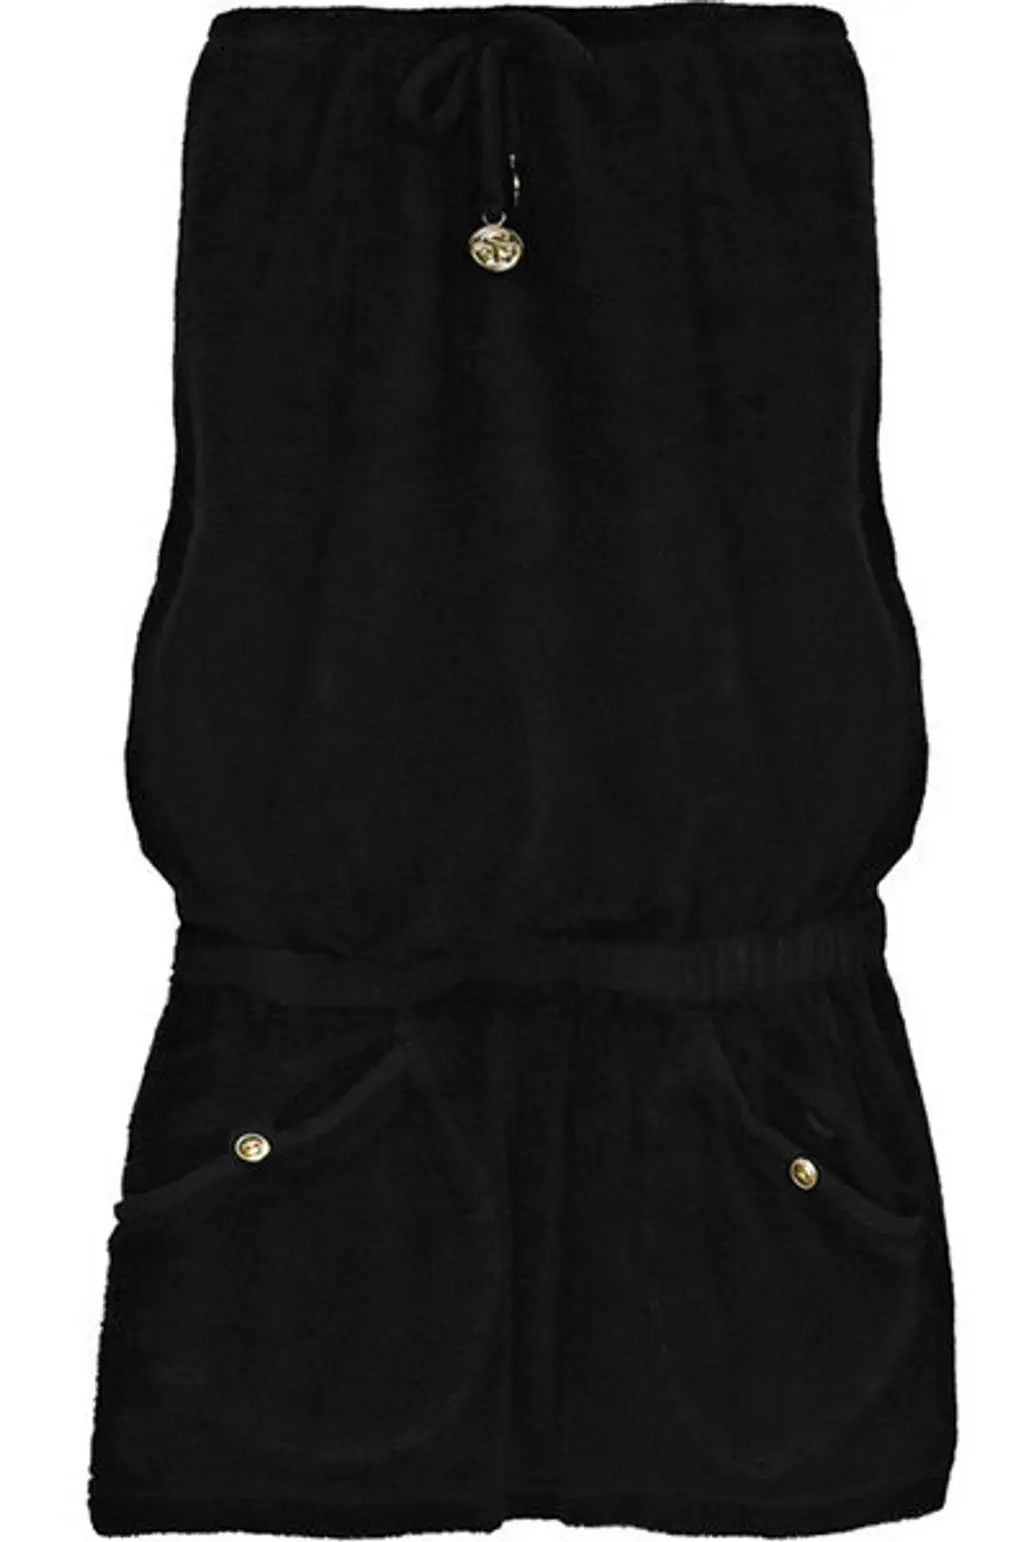 Shay Todd Strapless Toweling Mini Dress